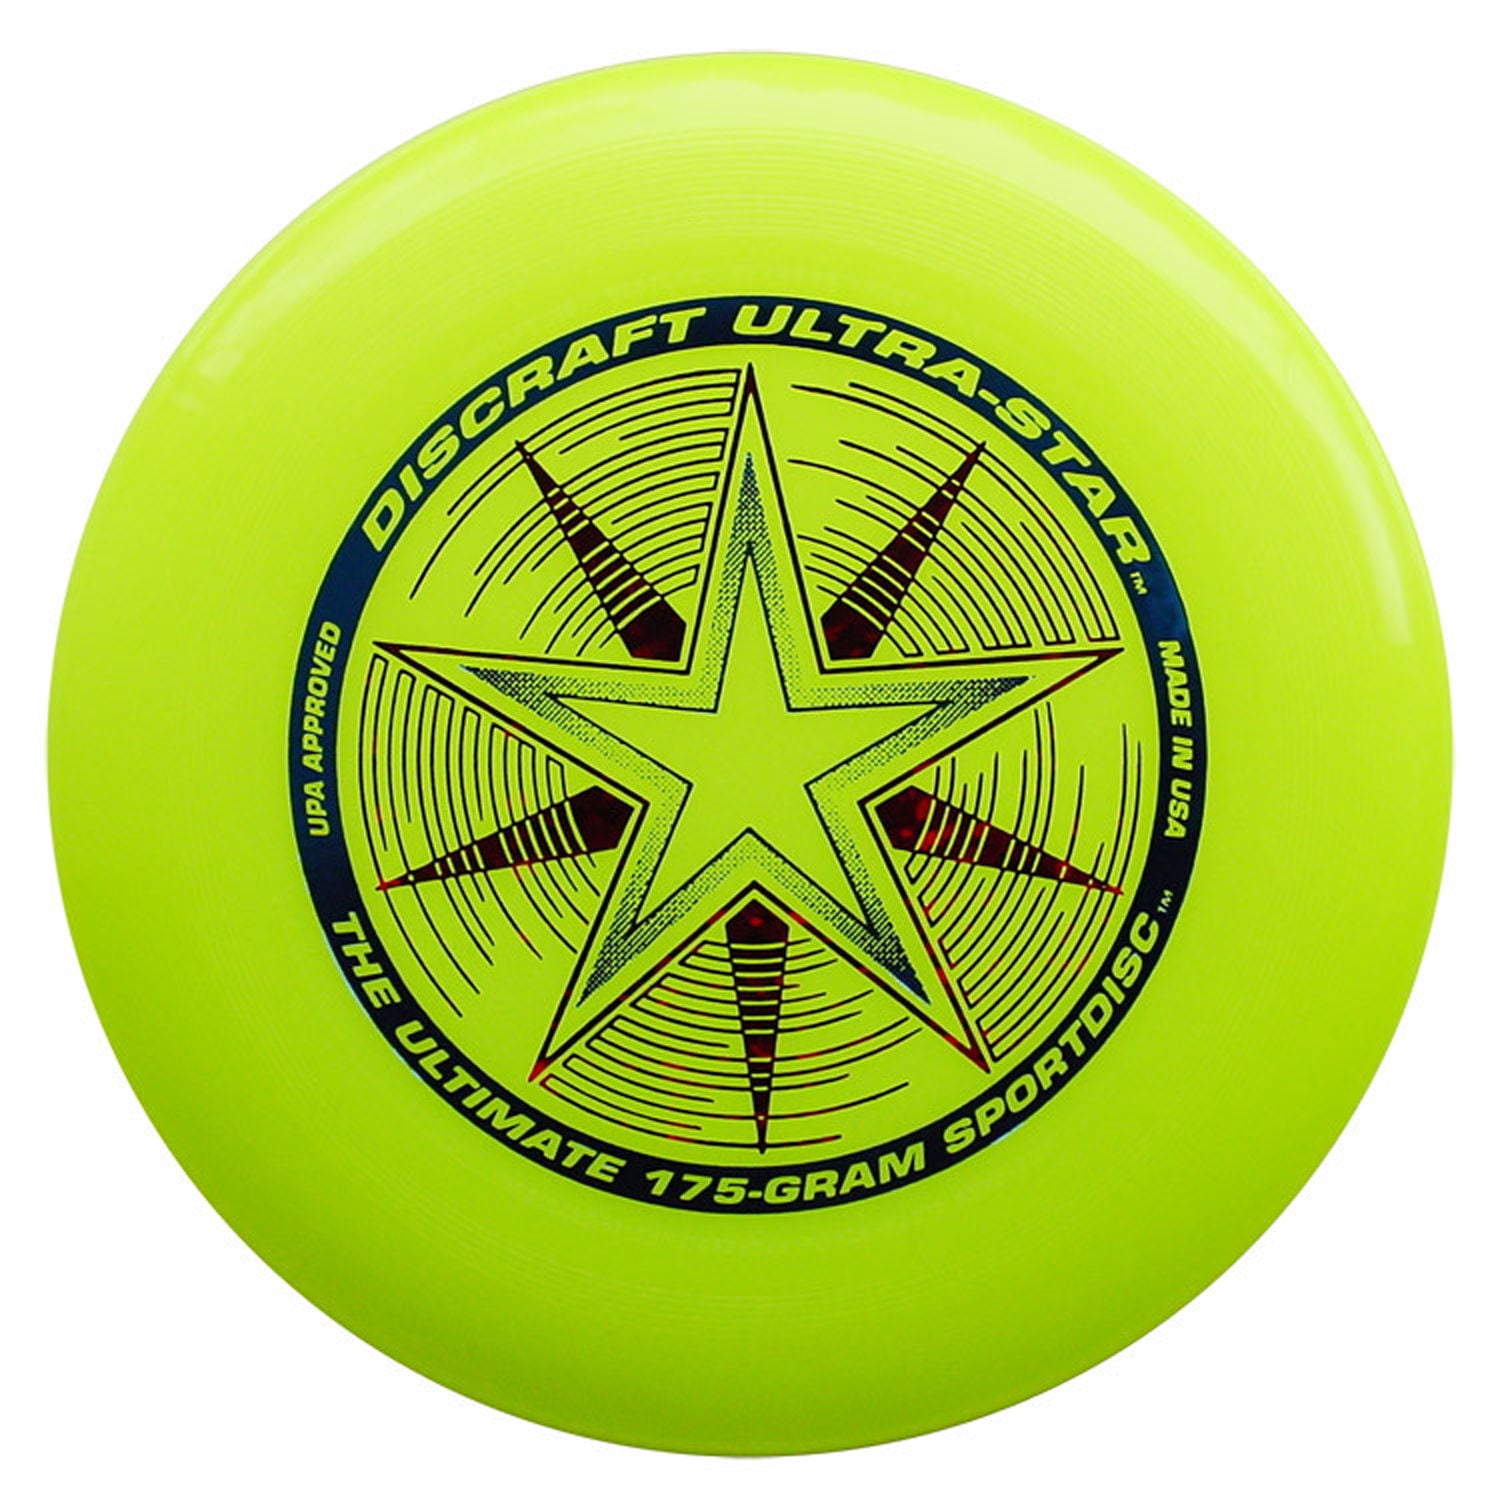 NEW Discraft ULTRA-STAR 175g Ultimate Frisbee Disc BLUE/GLOW 2 Pack 